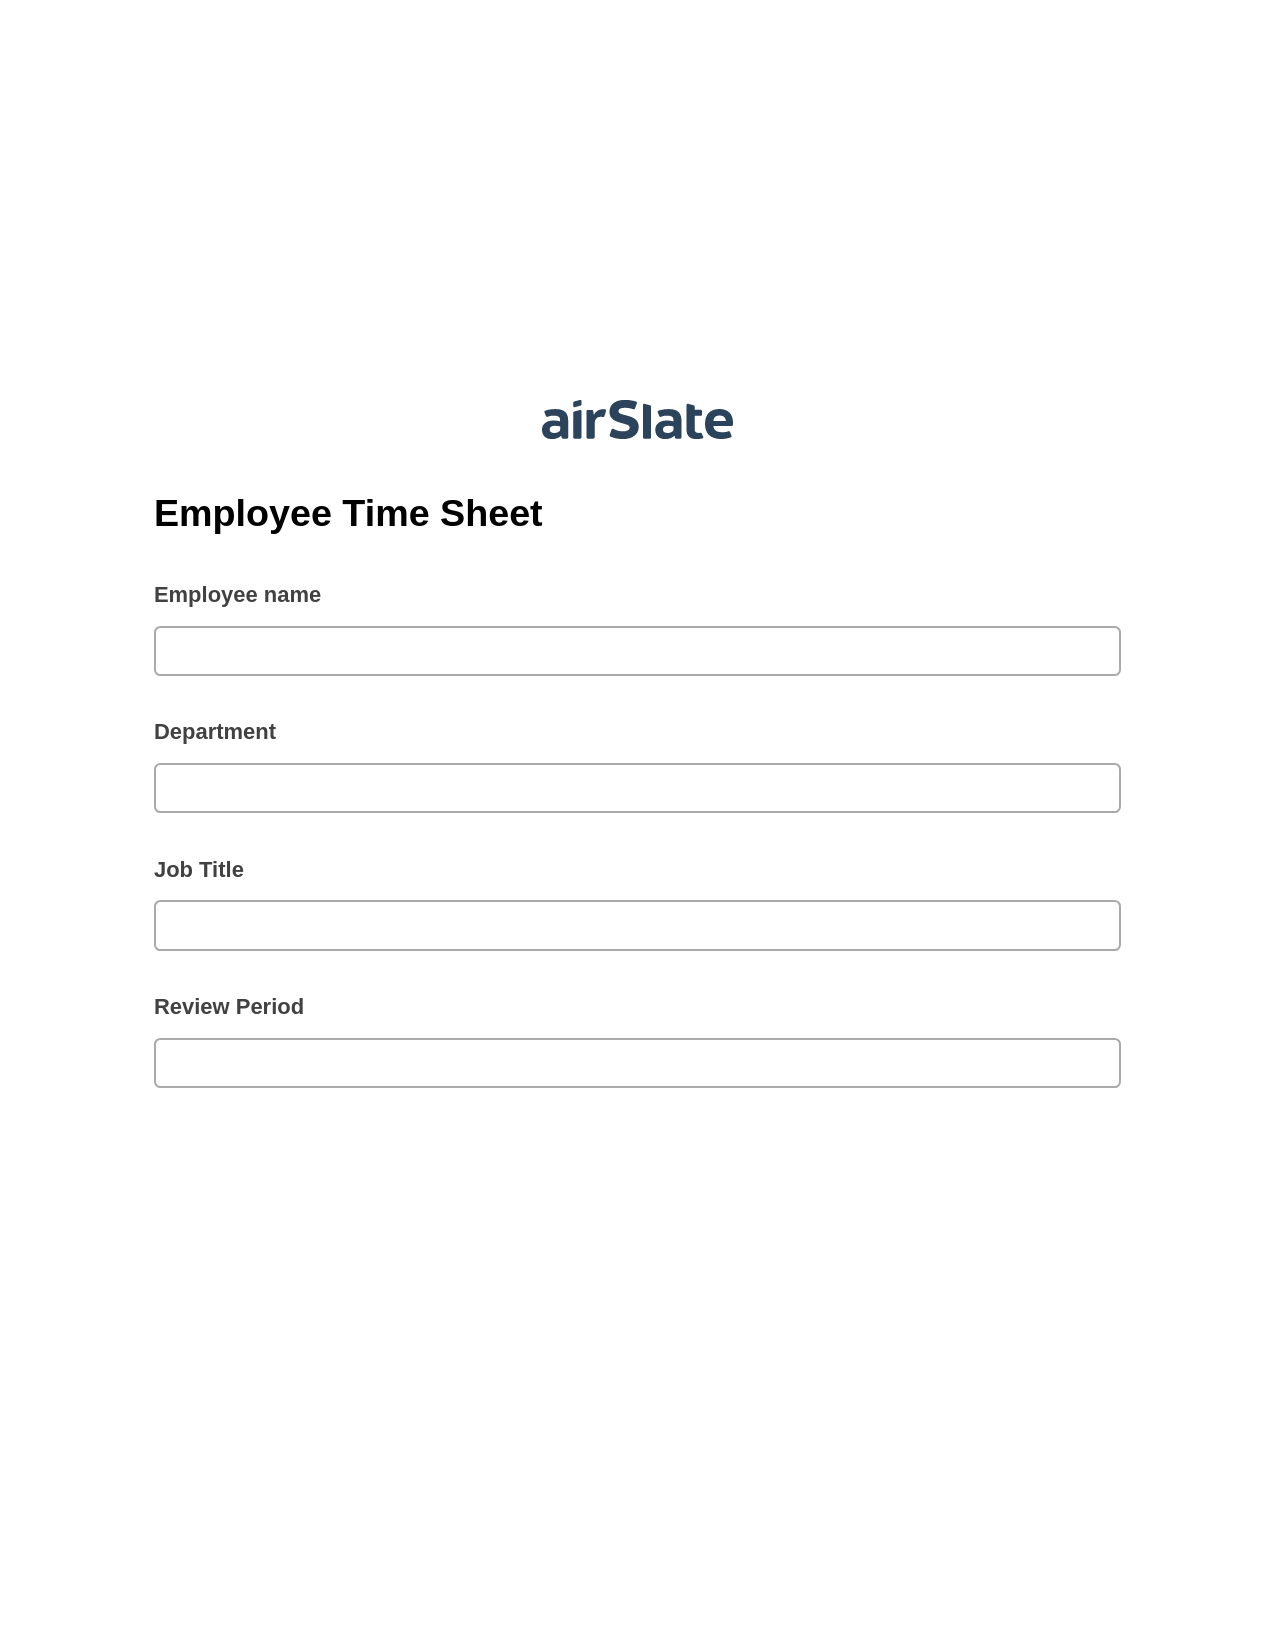 Employee Time Sheet Pre-fill Document Bot, Create Salesforce Records Bot, Archive to SharePoint Folder Bot